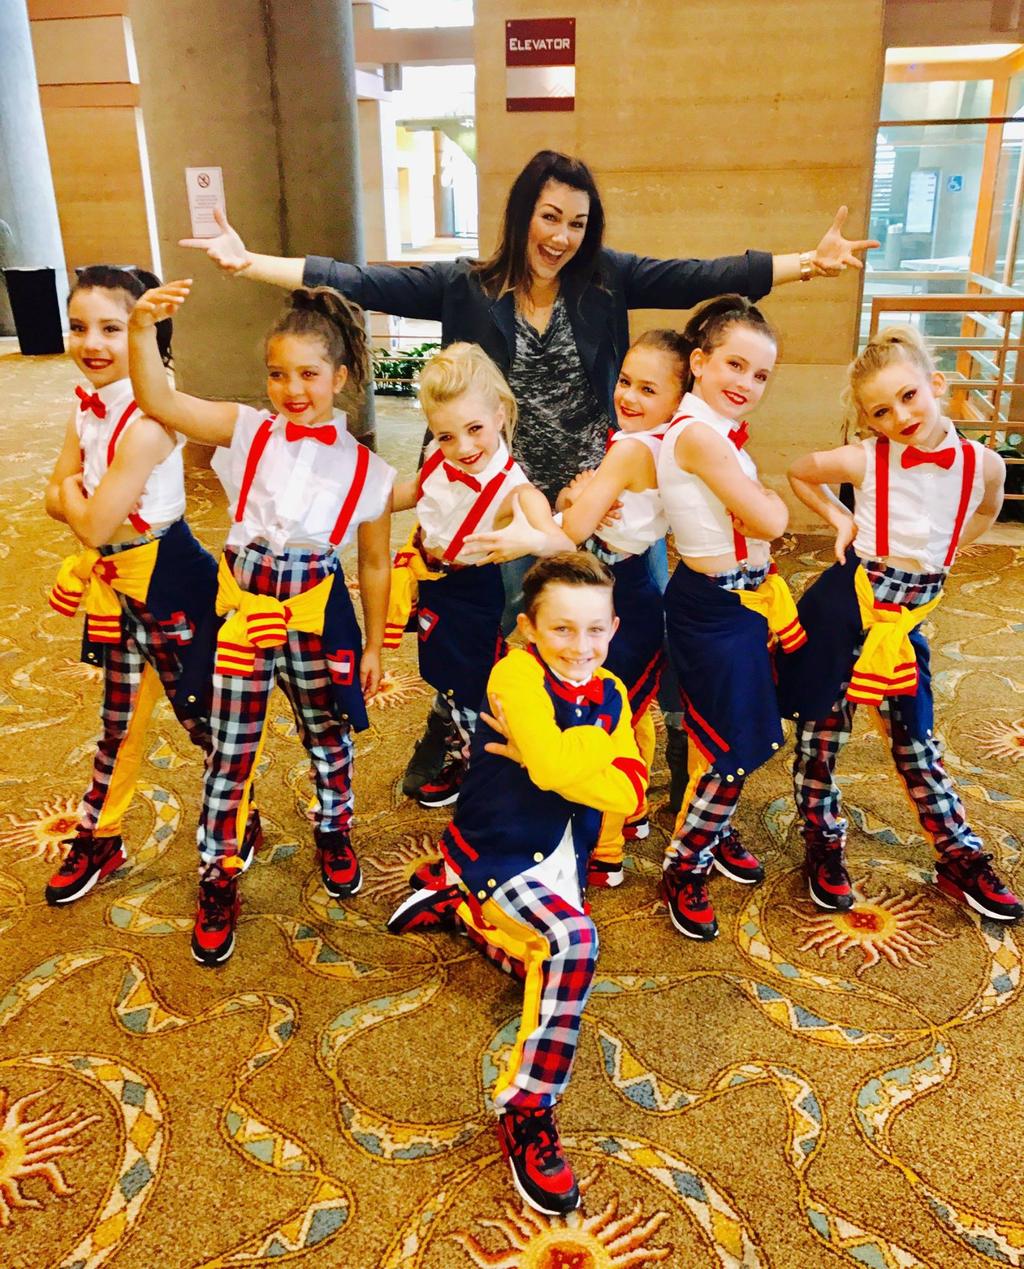 Sarah will be overseeing the program choreography, choosing music and costumes, guiding Lil Fusion dancers and corresponding with all Fusion Families.